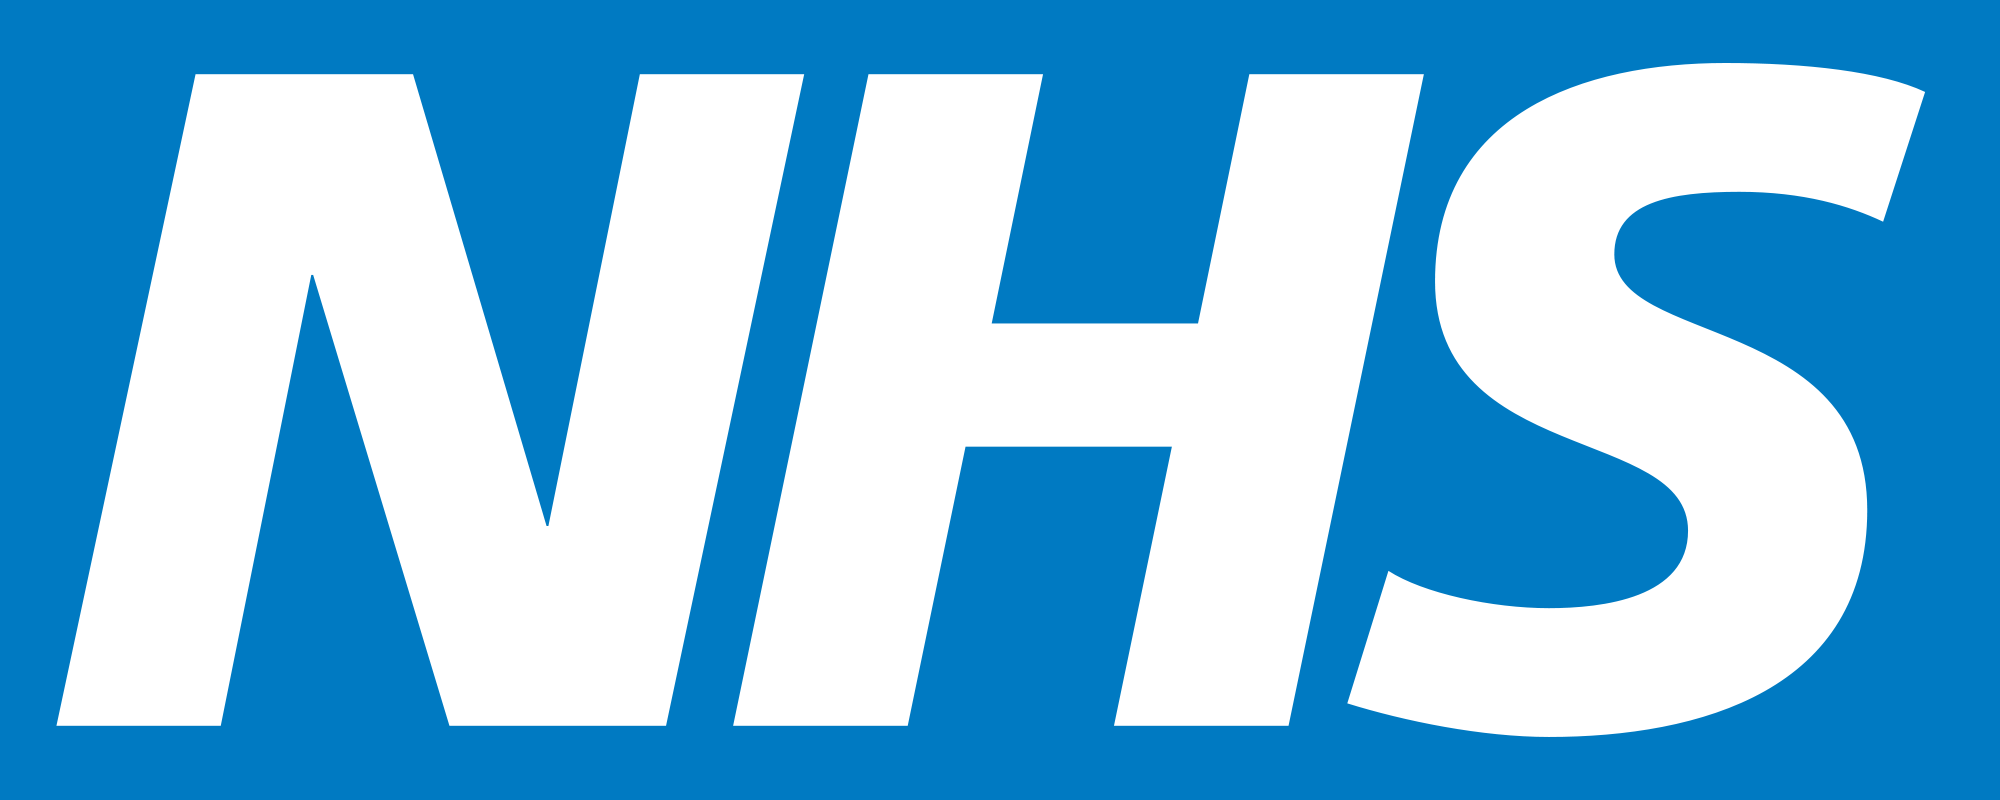 NHS Ranked Number One Health System of 11 Countries Amplitude